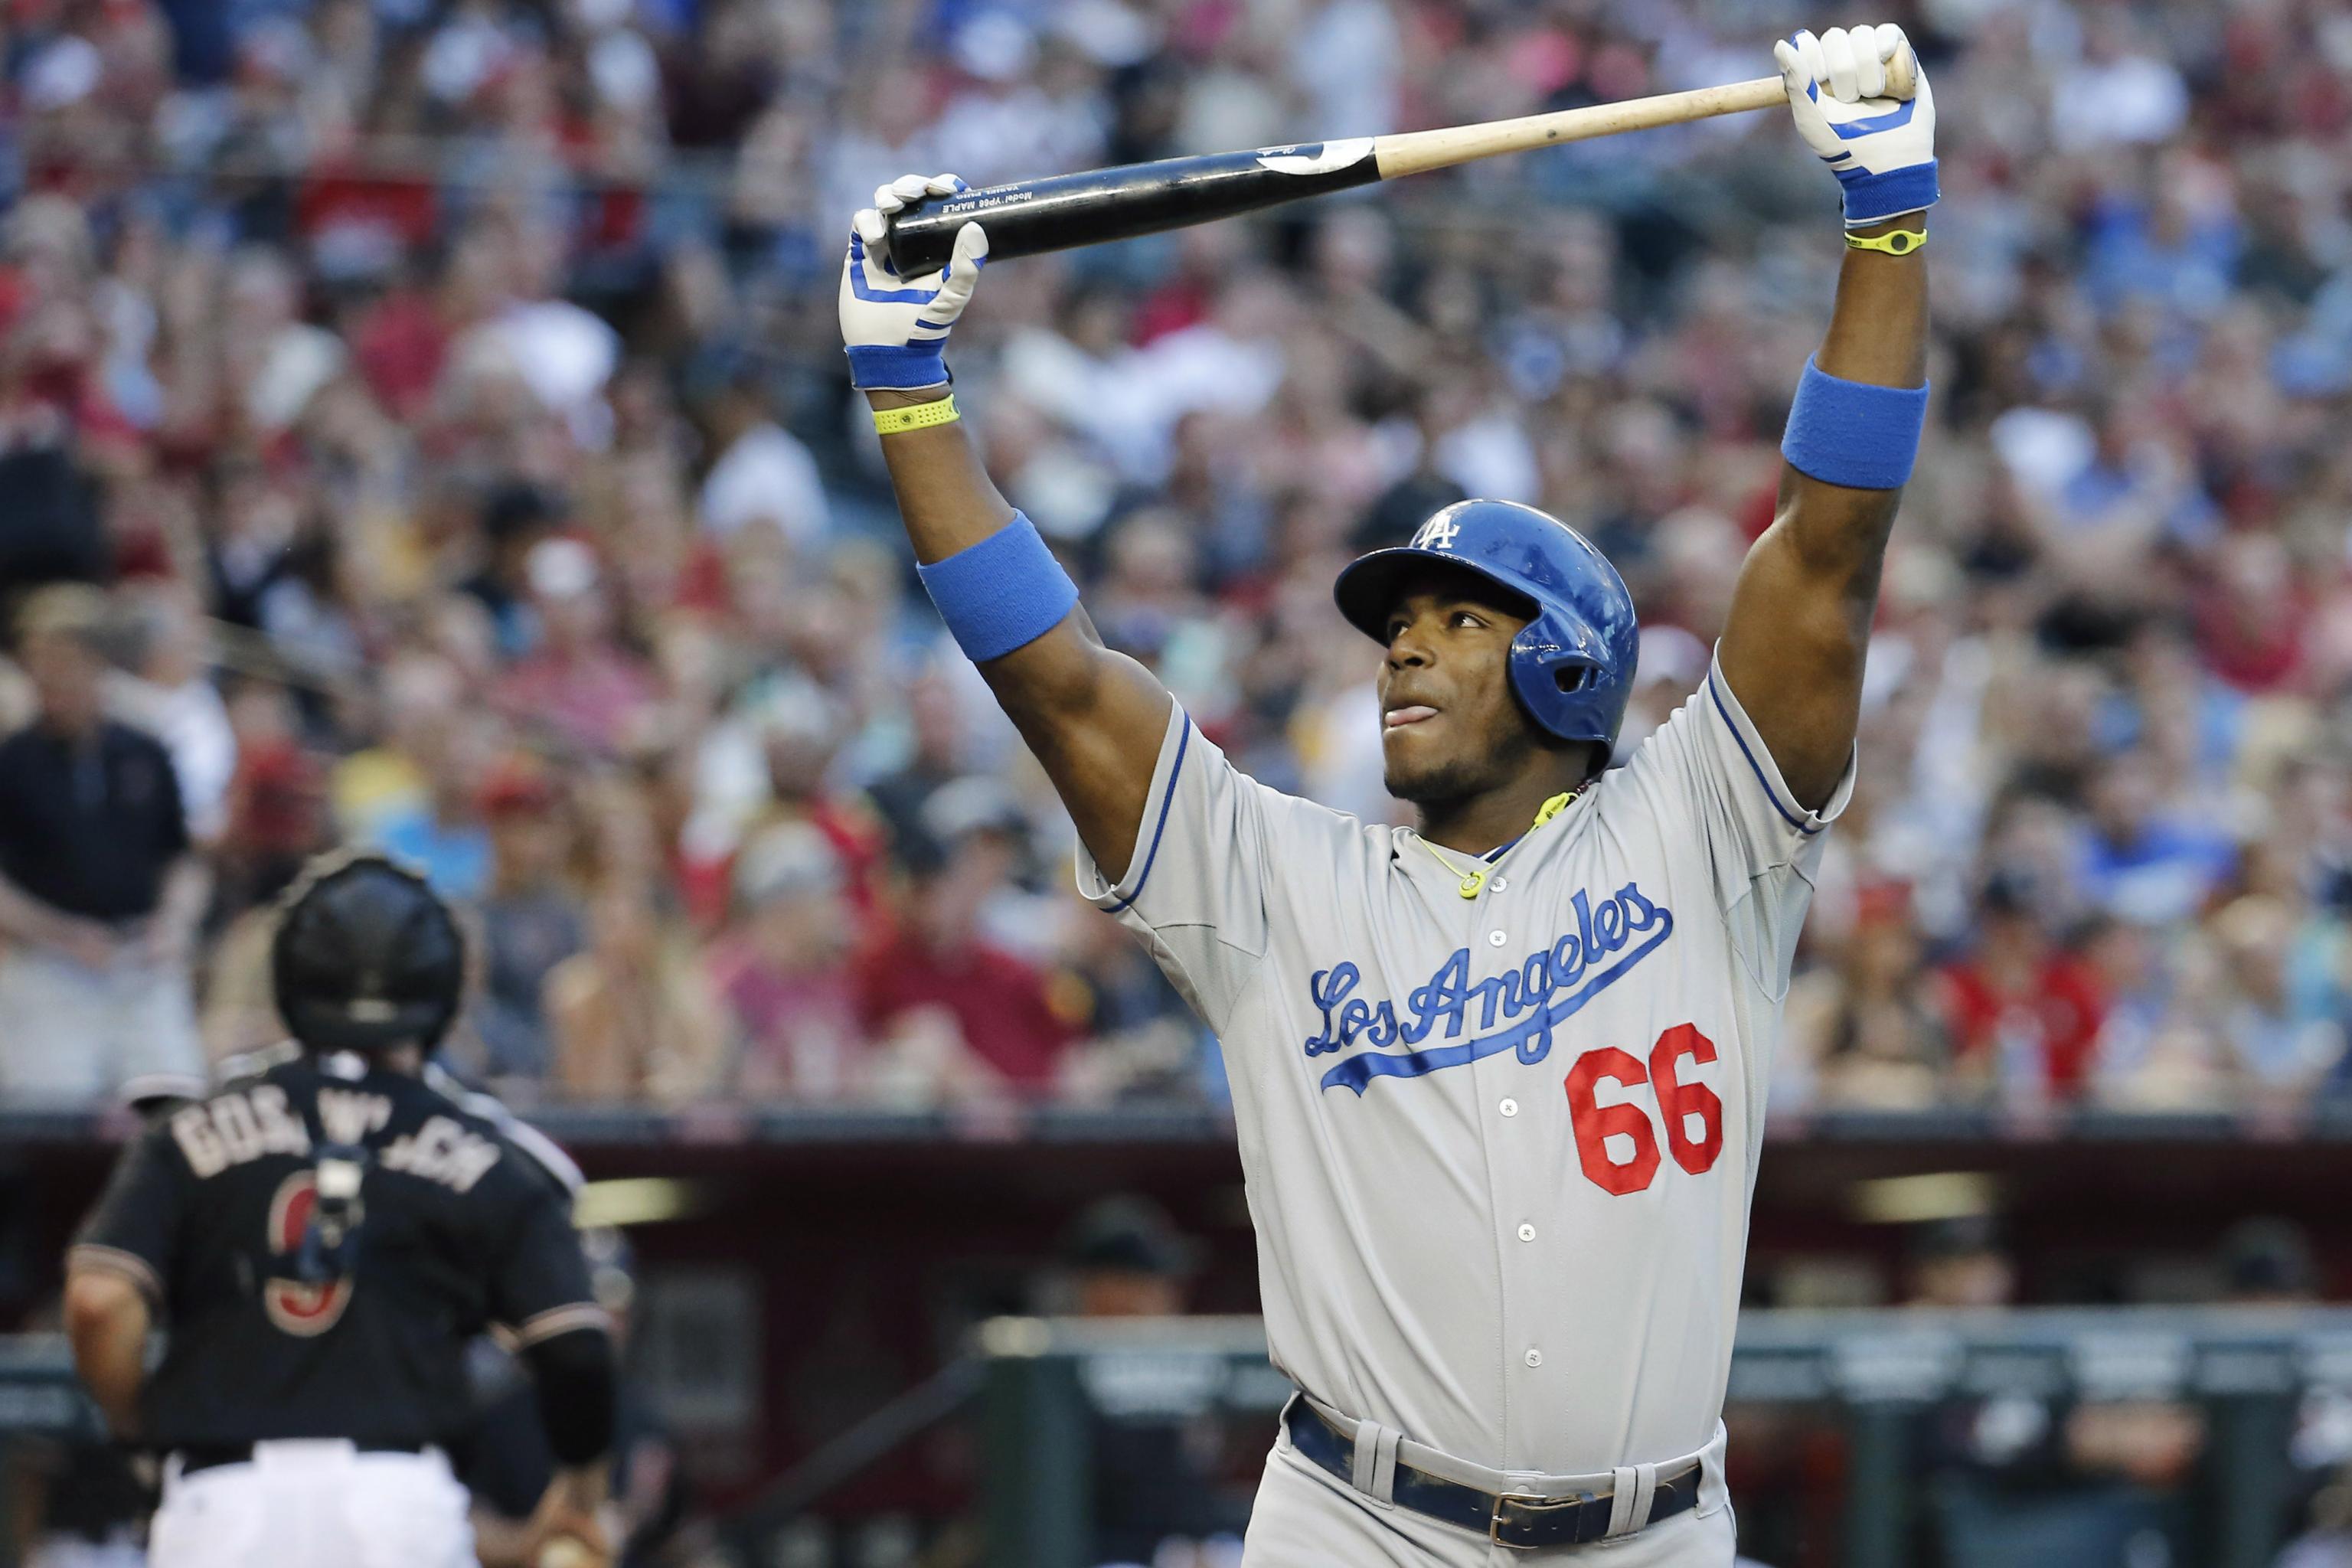 Will Yasiel Puig make NL All-Star team? Likely selections